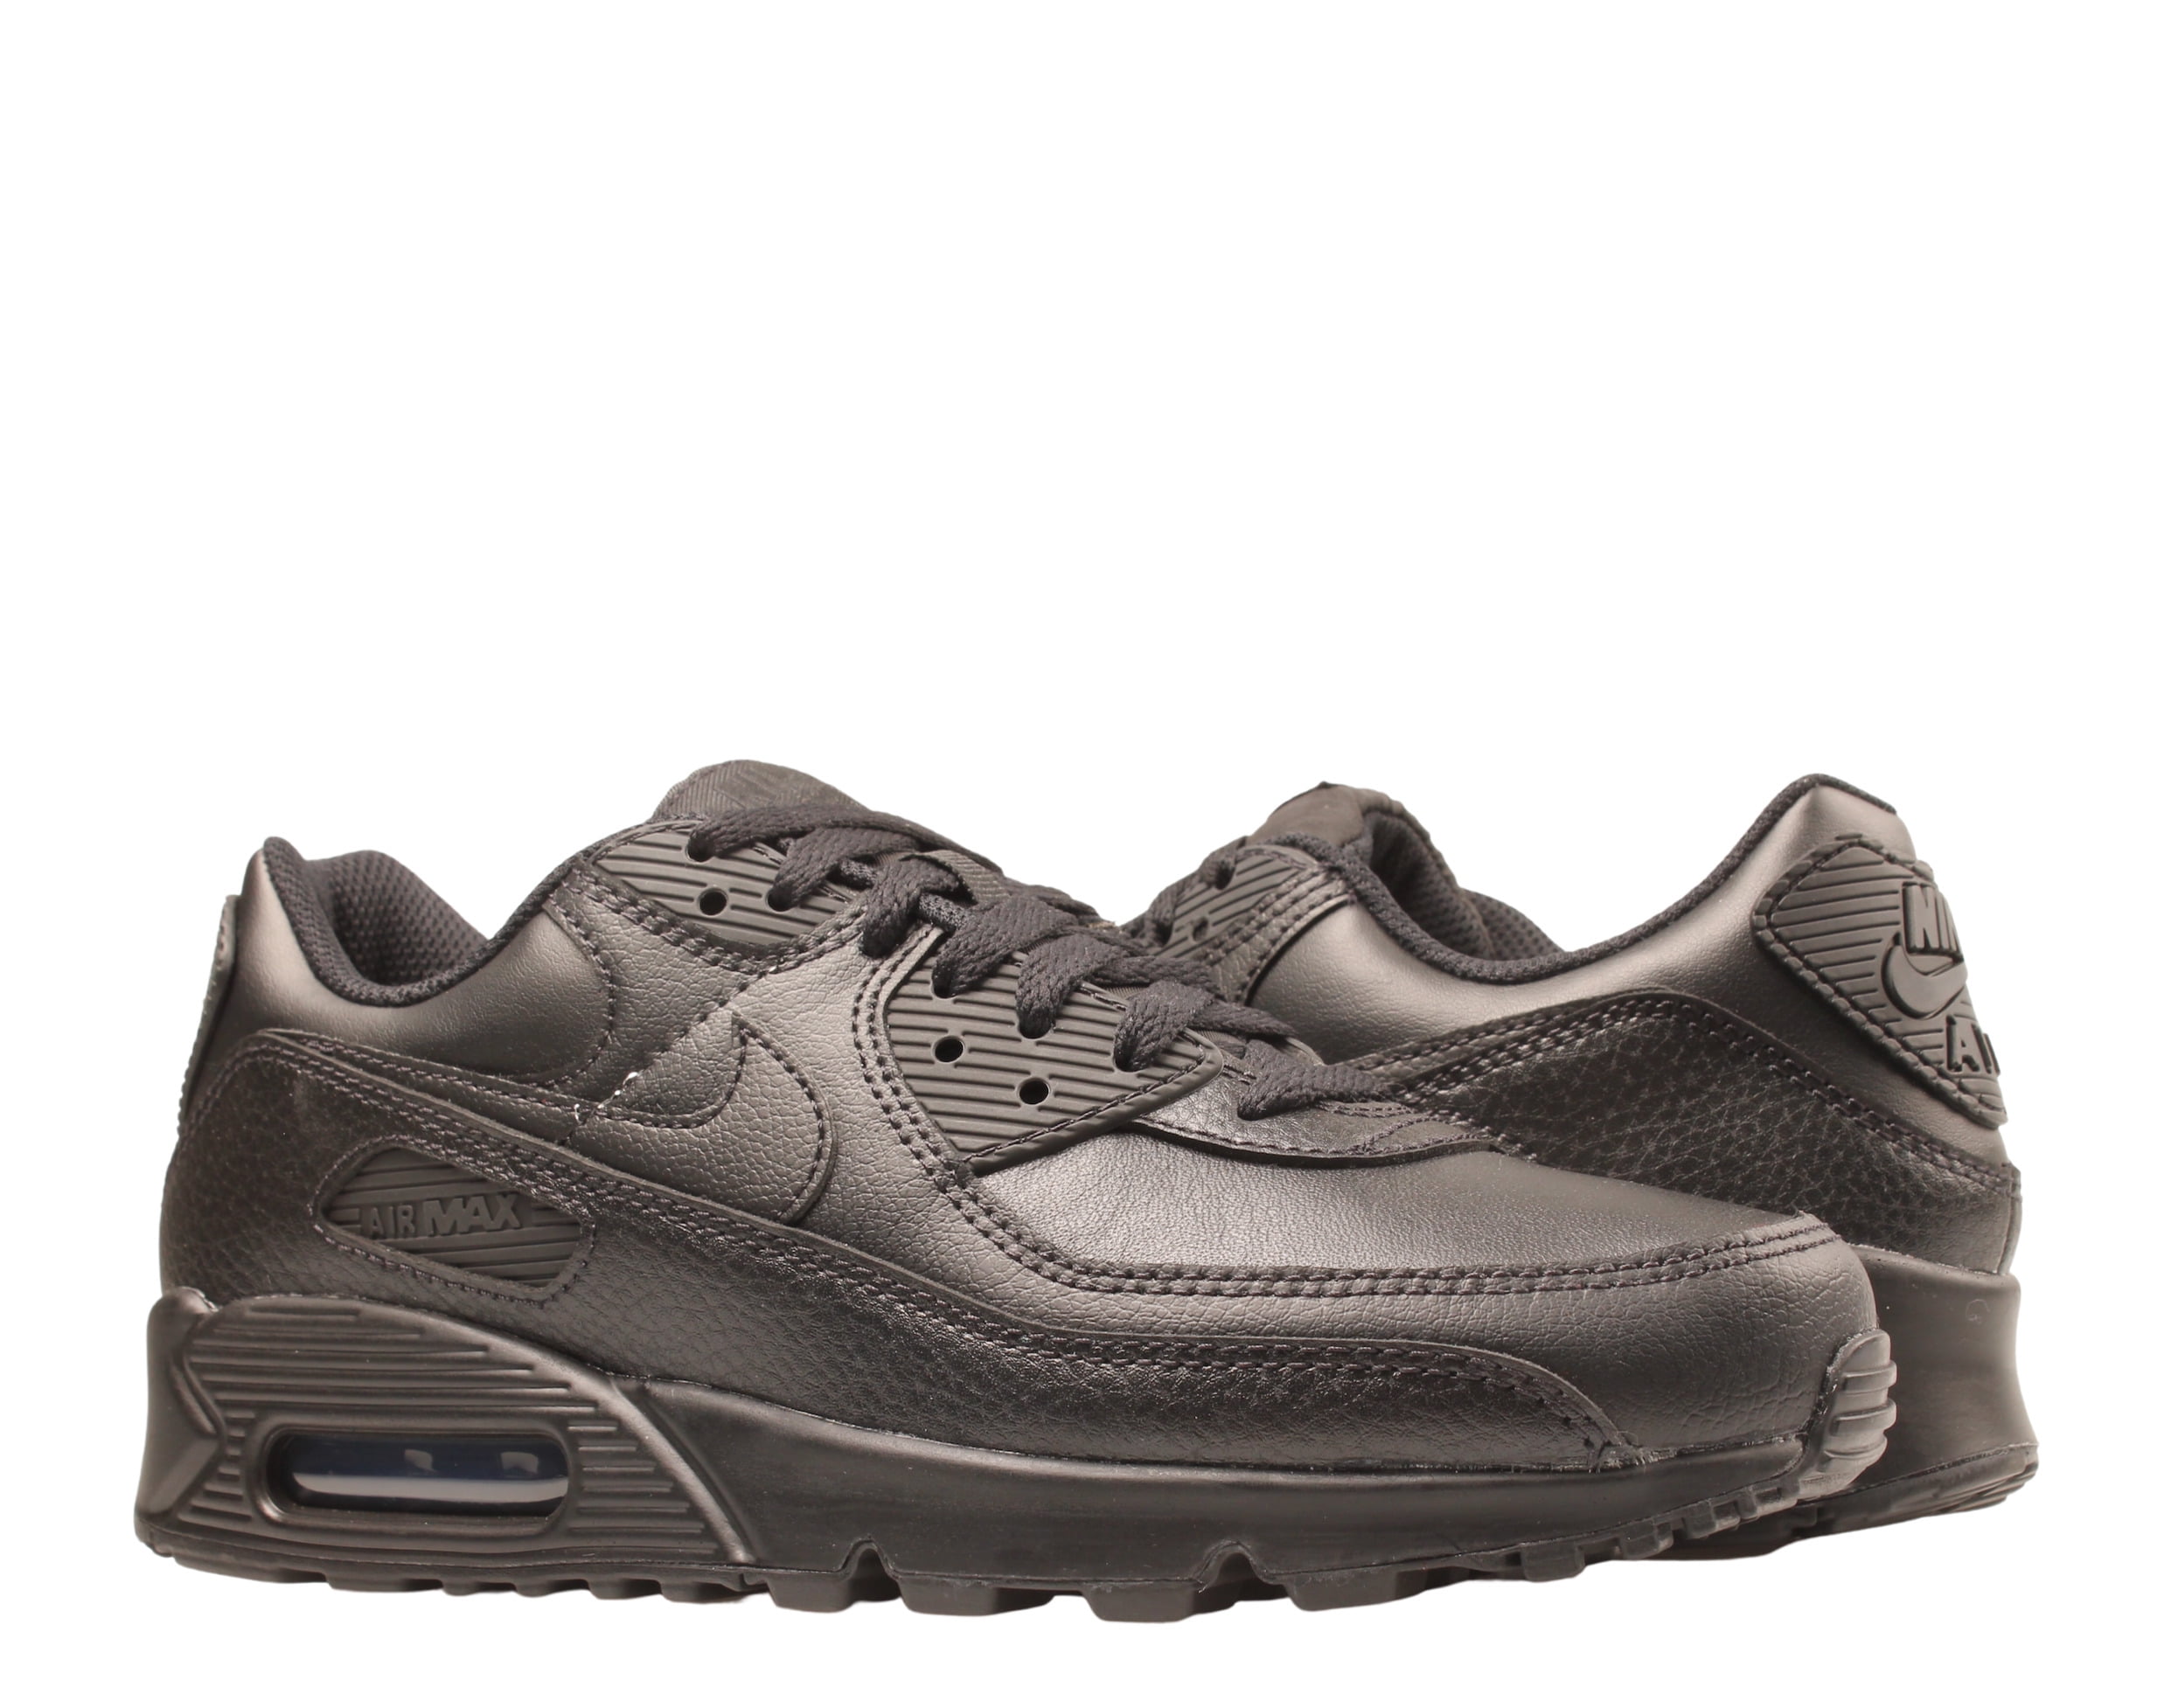 Nike - Nike Air Max 90 Leather Men's Running Shoes Size 7 - Walmart.com